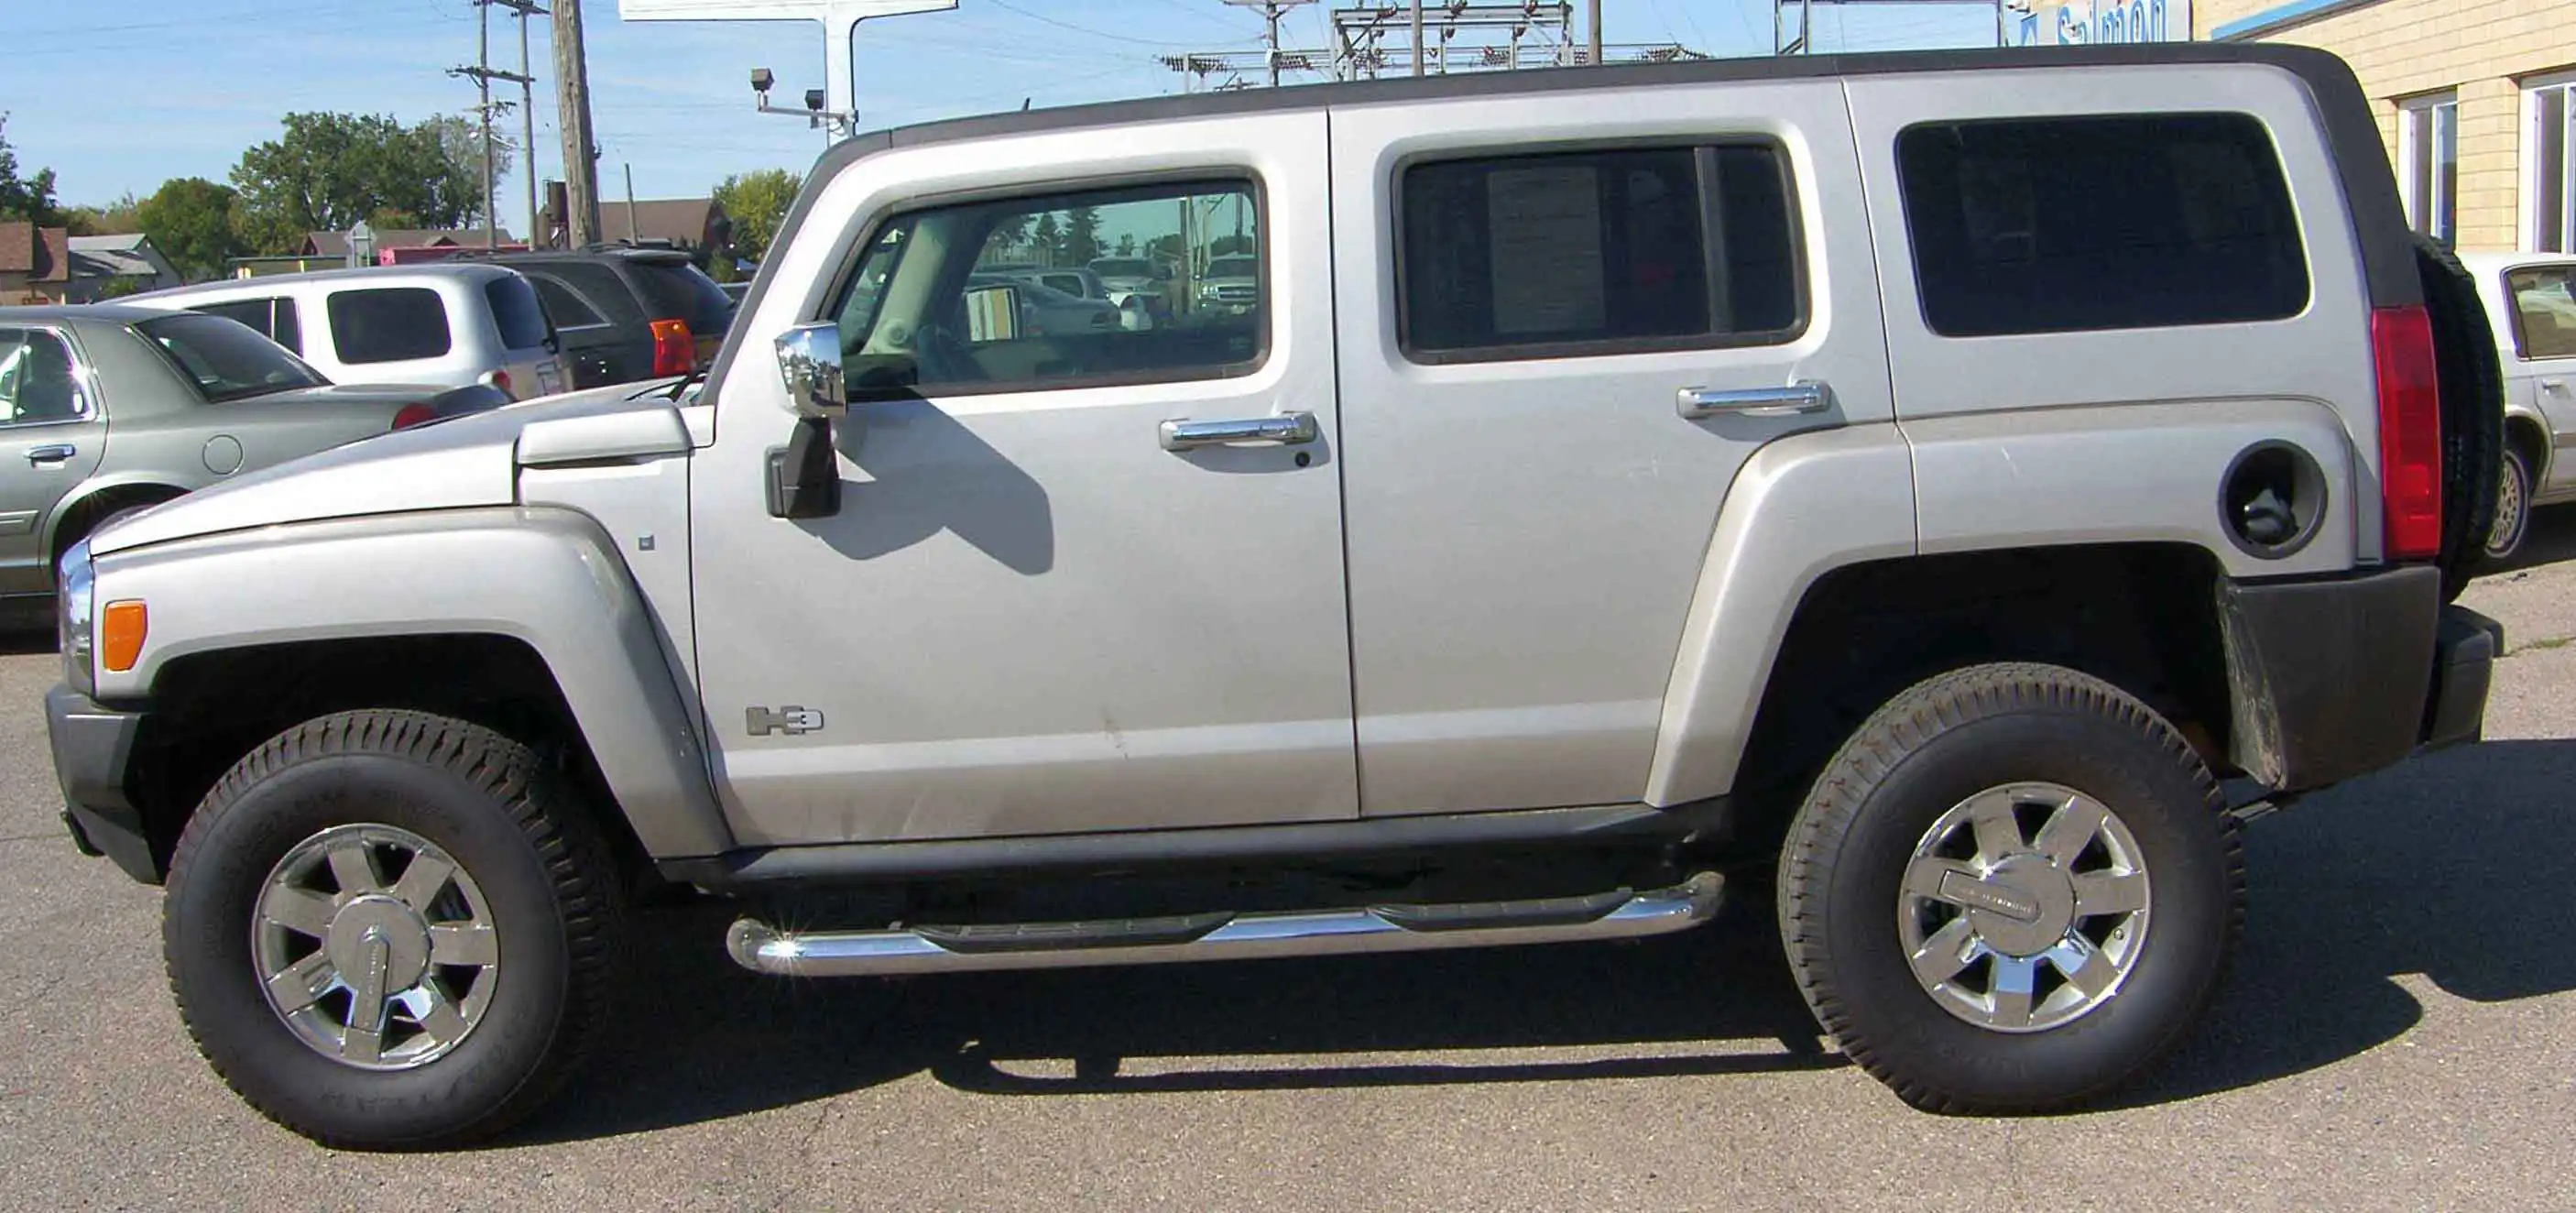 2007 Hummer H3 Used Cars Buy Hummer Used Cars Product On Alibaba Com